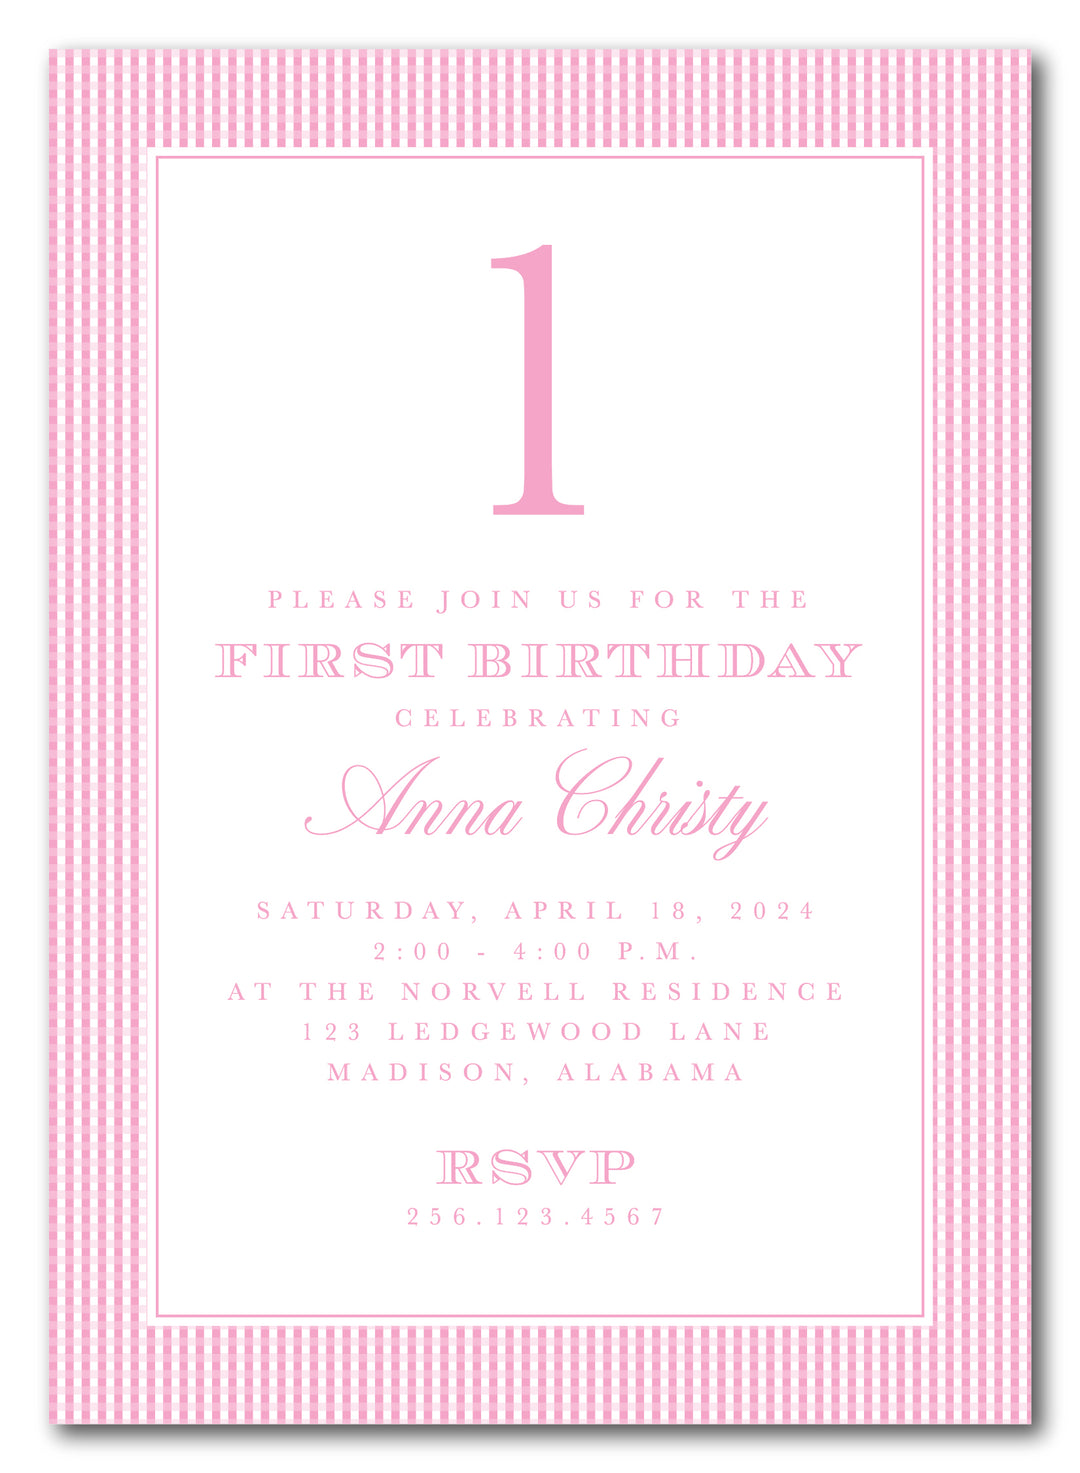 The Pink Gingham Birthday Party Invitation